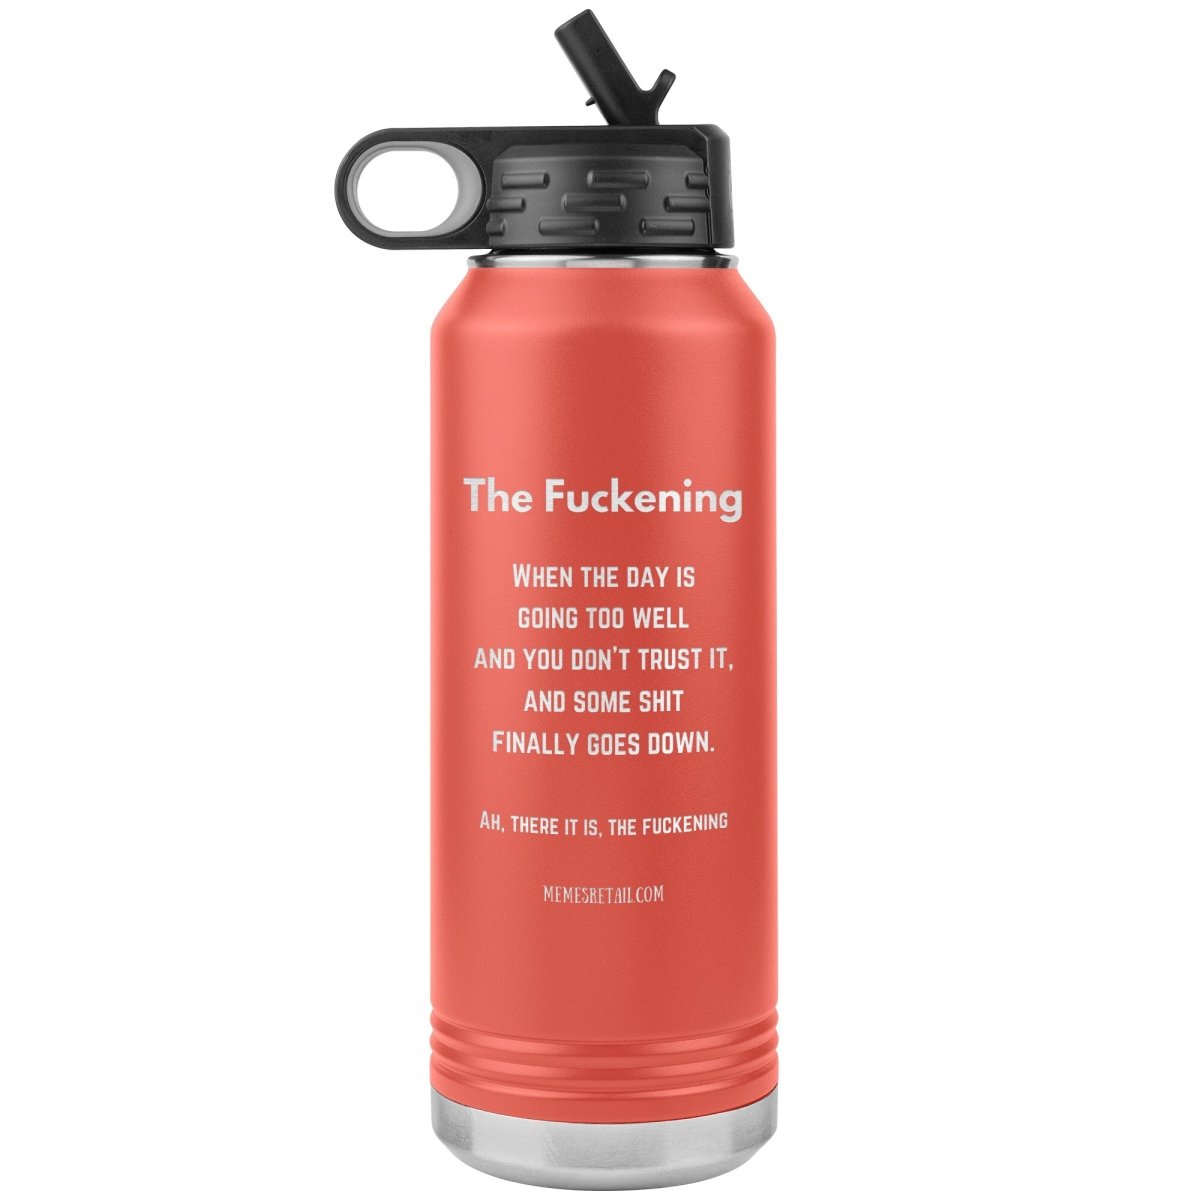 The Fuckening, When you don't trust the day. 32 oz Water Bottle, Coral - MemesRetail.com